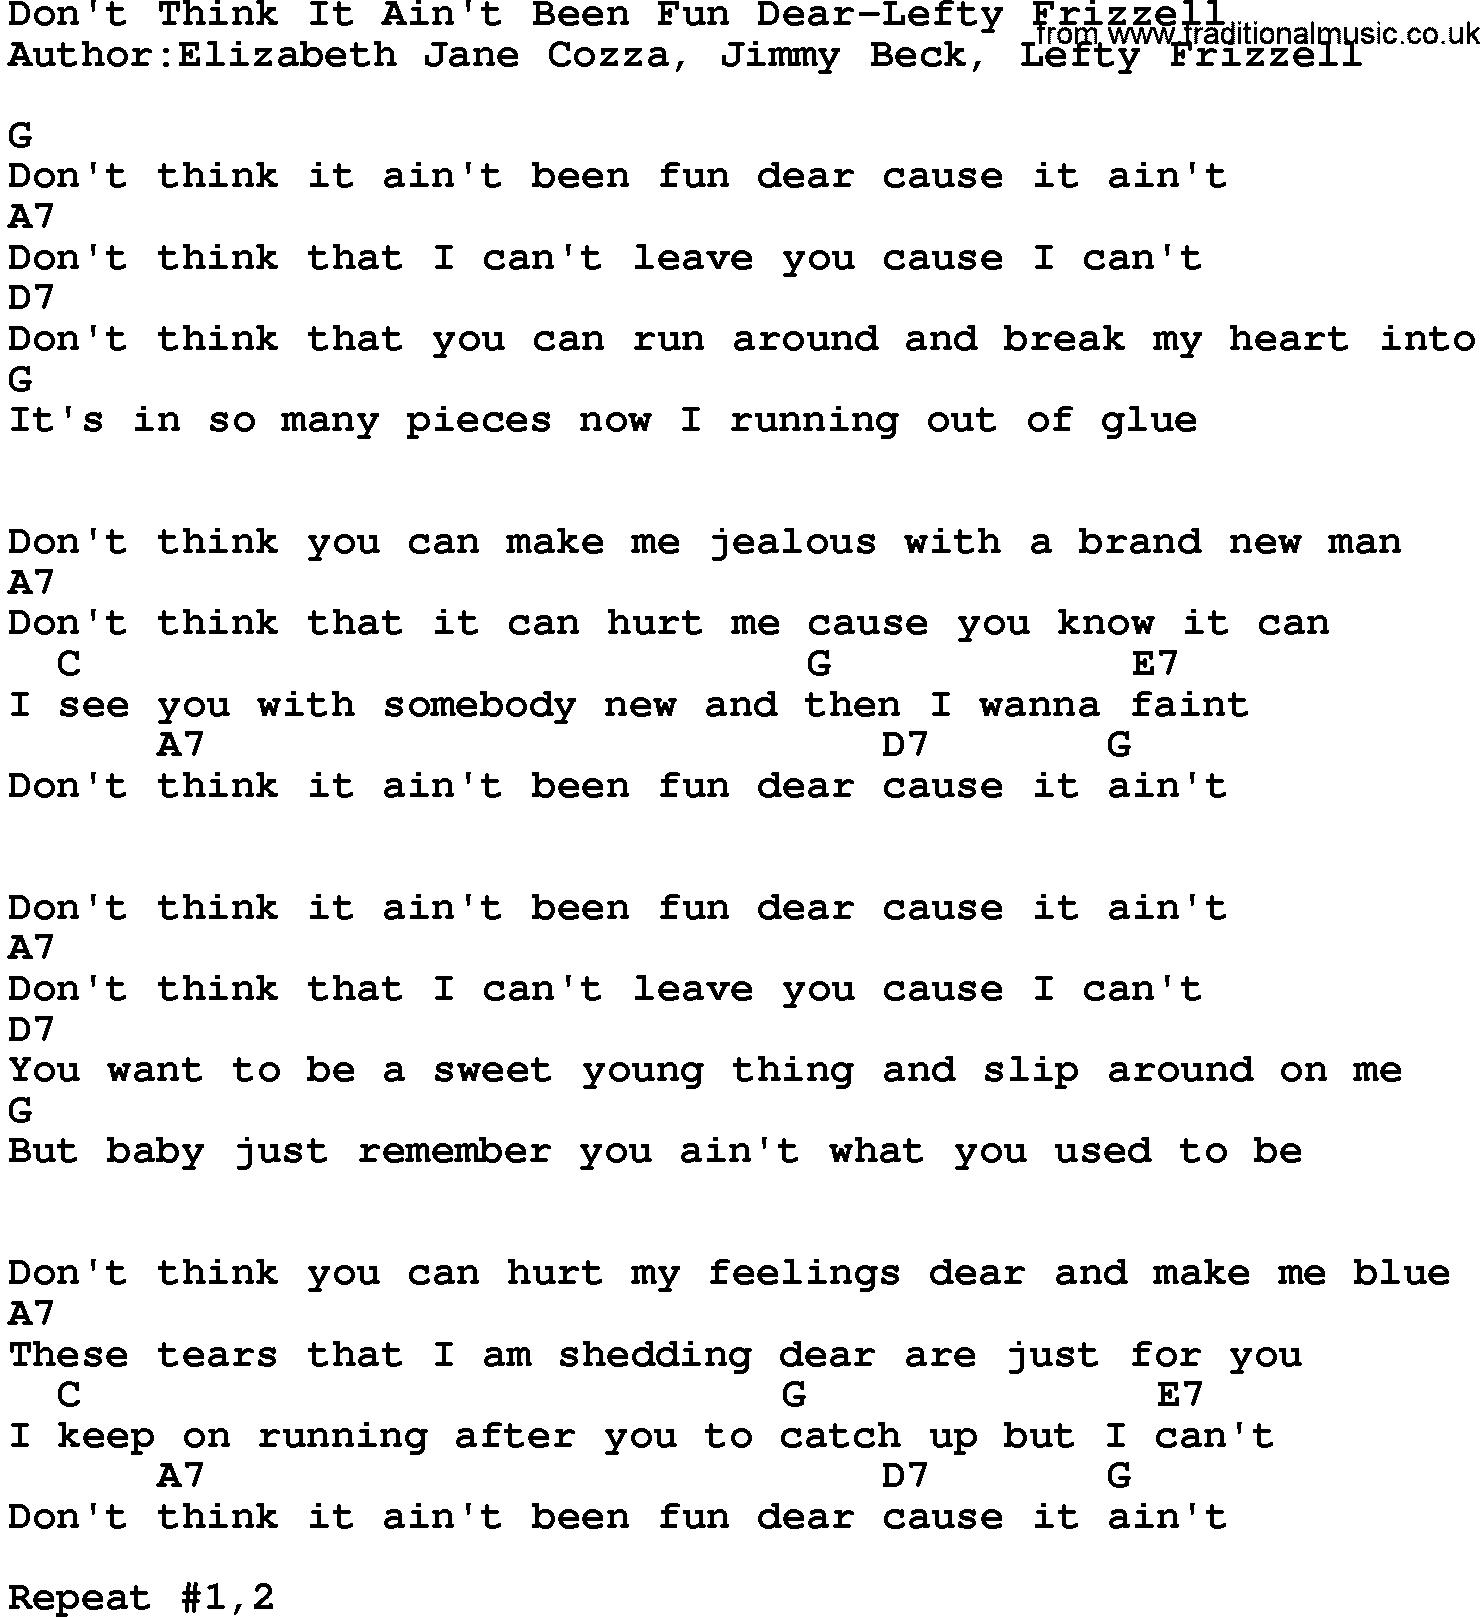 Country music song: Don't Think It Ain't Been Fun Dear-Lefty Frizzell lyrics and chords